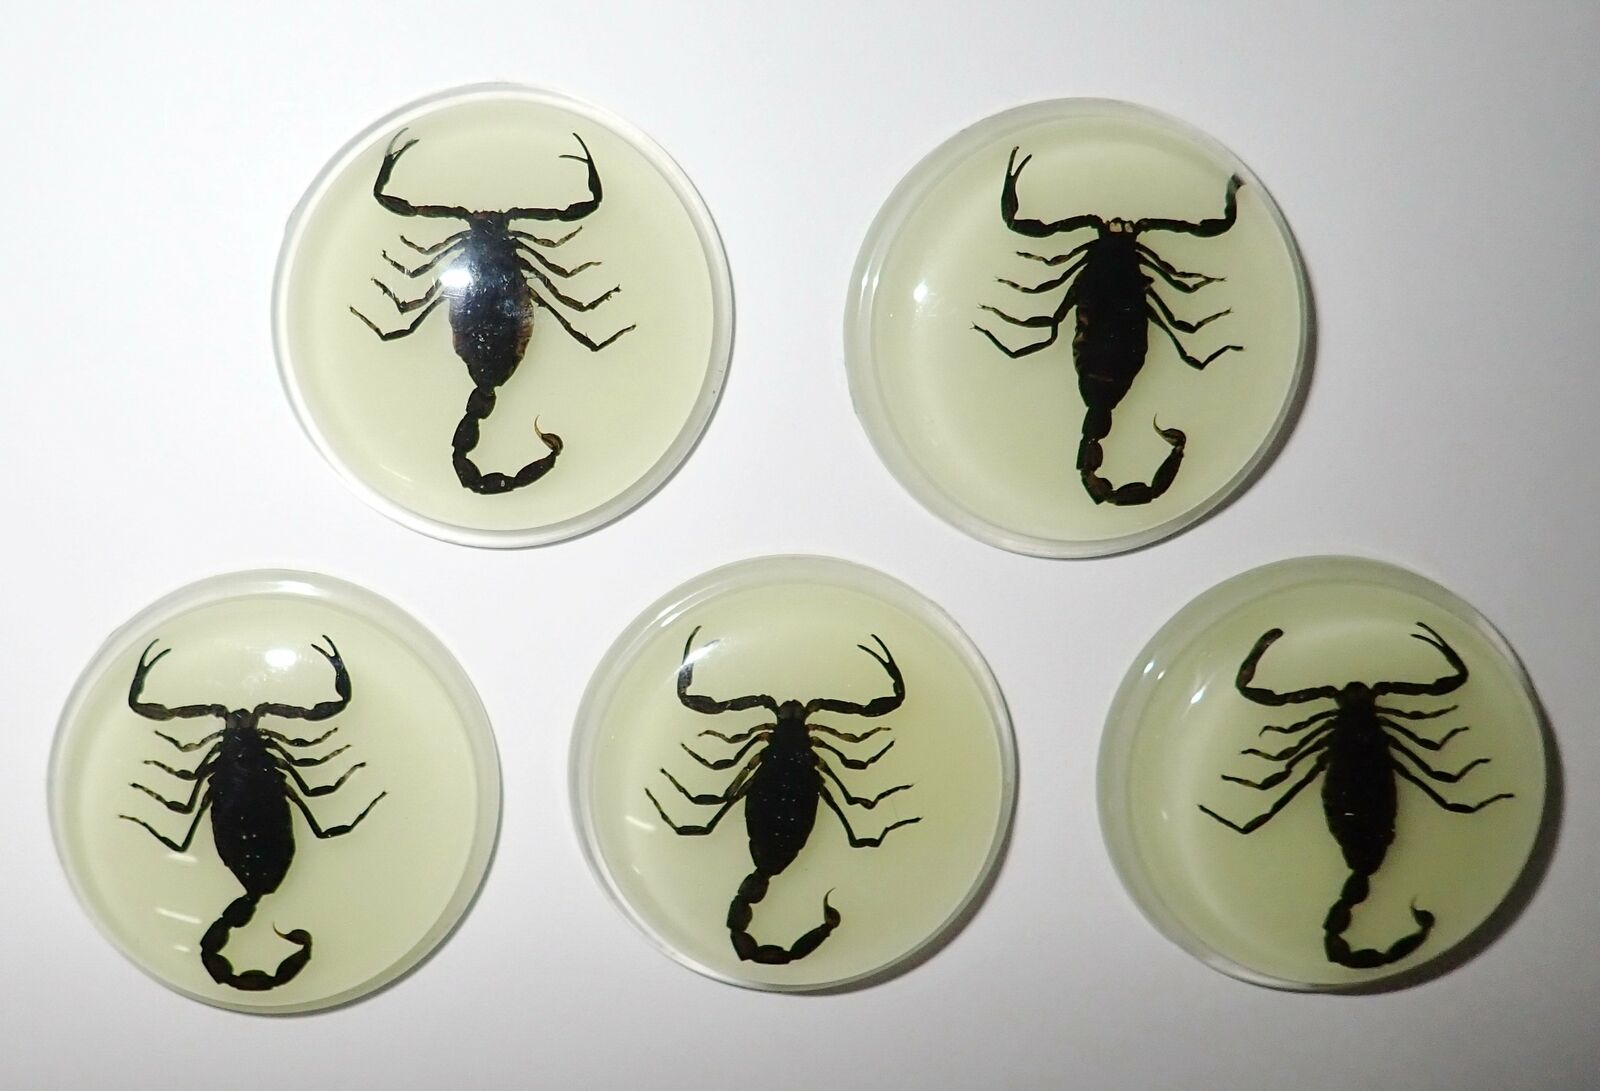 Insect Cabochon Black Scorpion 38.5 mm Round inner 35 mm Glow 5 pieces Lot